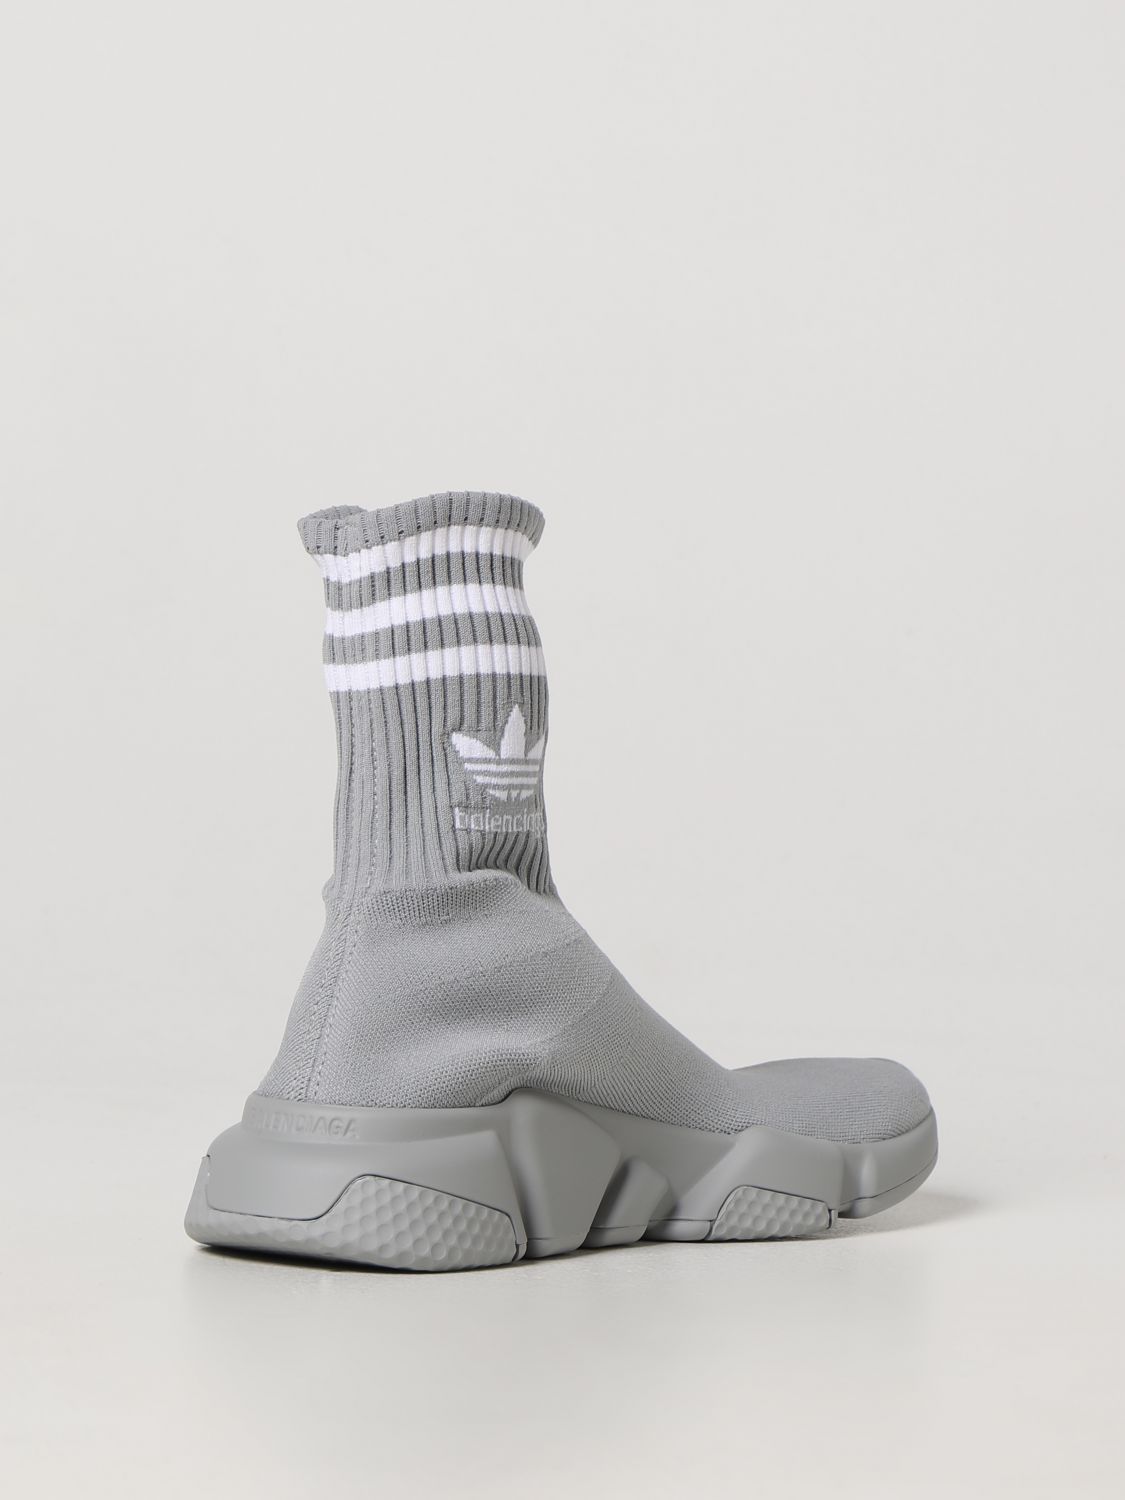 BALENCIAGA Speed Technical Recycled Knit Sock Sneakers  Holt Renfrew Canada